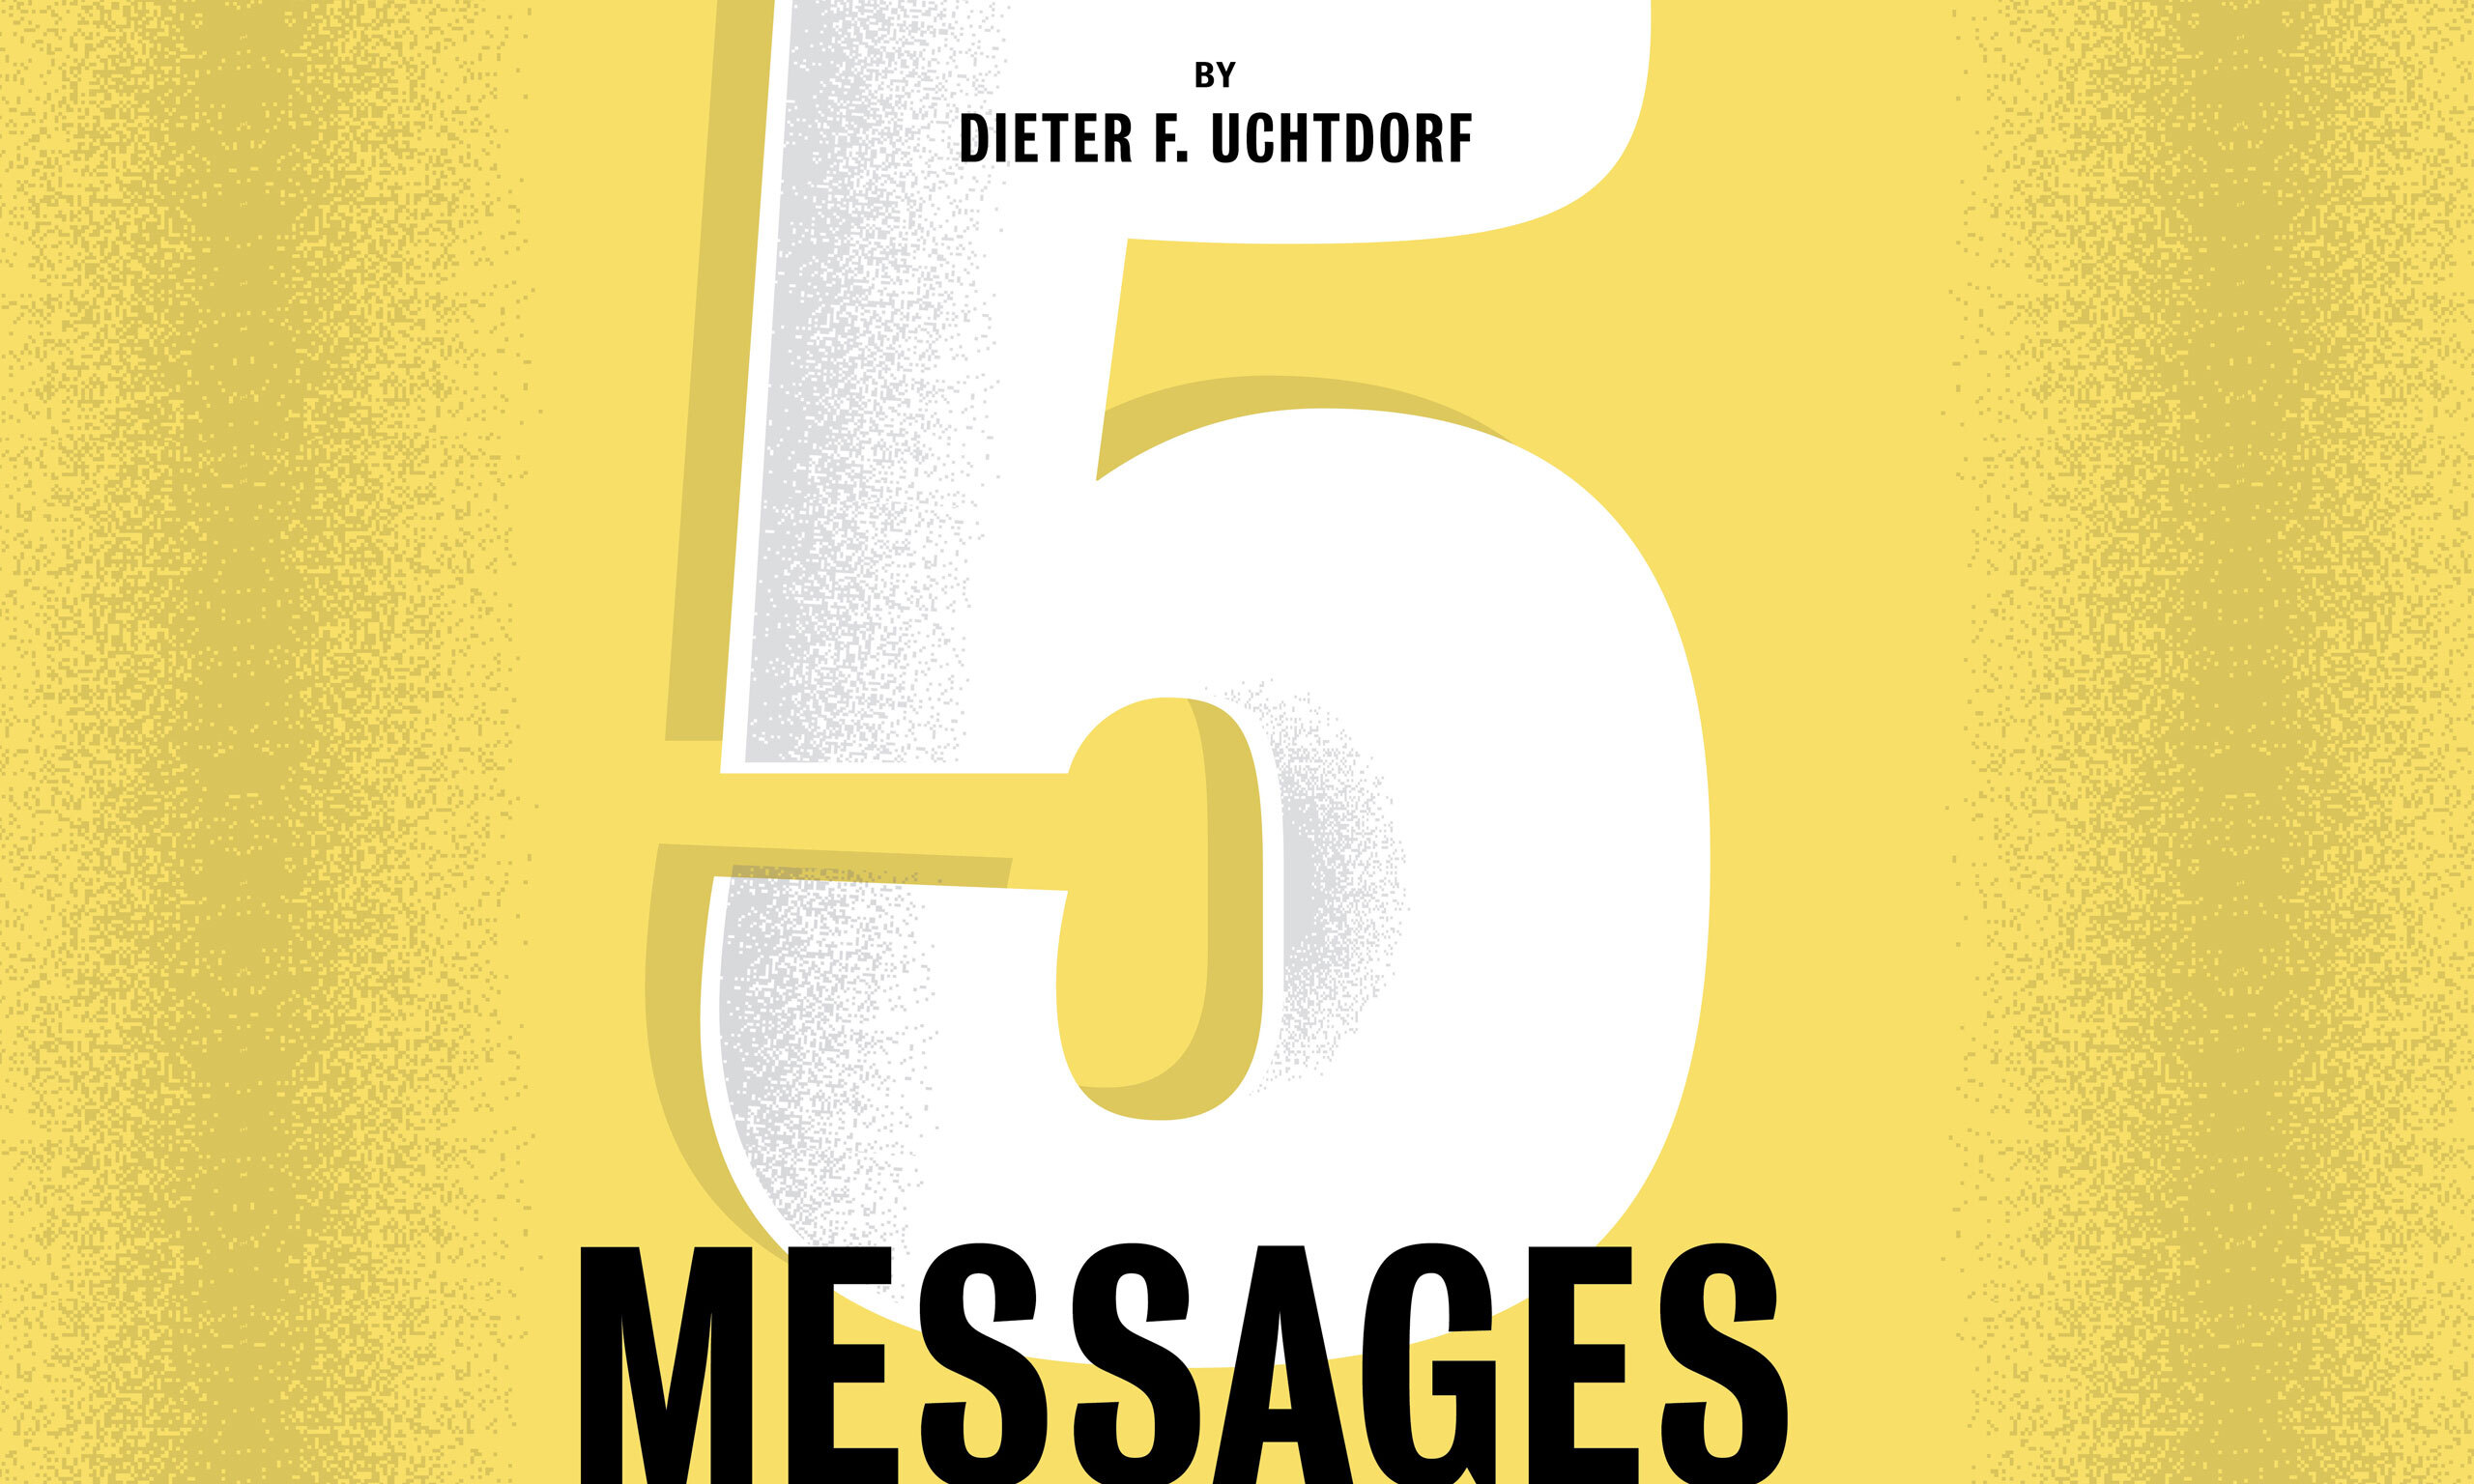 A yellow box with a large white number 5 inside. The text reads: "5 Messages by Dieter F. Uchtdorf. All of God's children—including you—need to hear these precious truths."